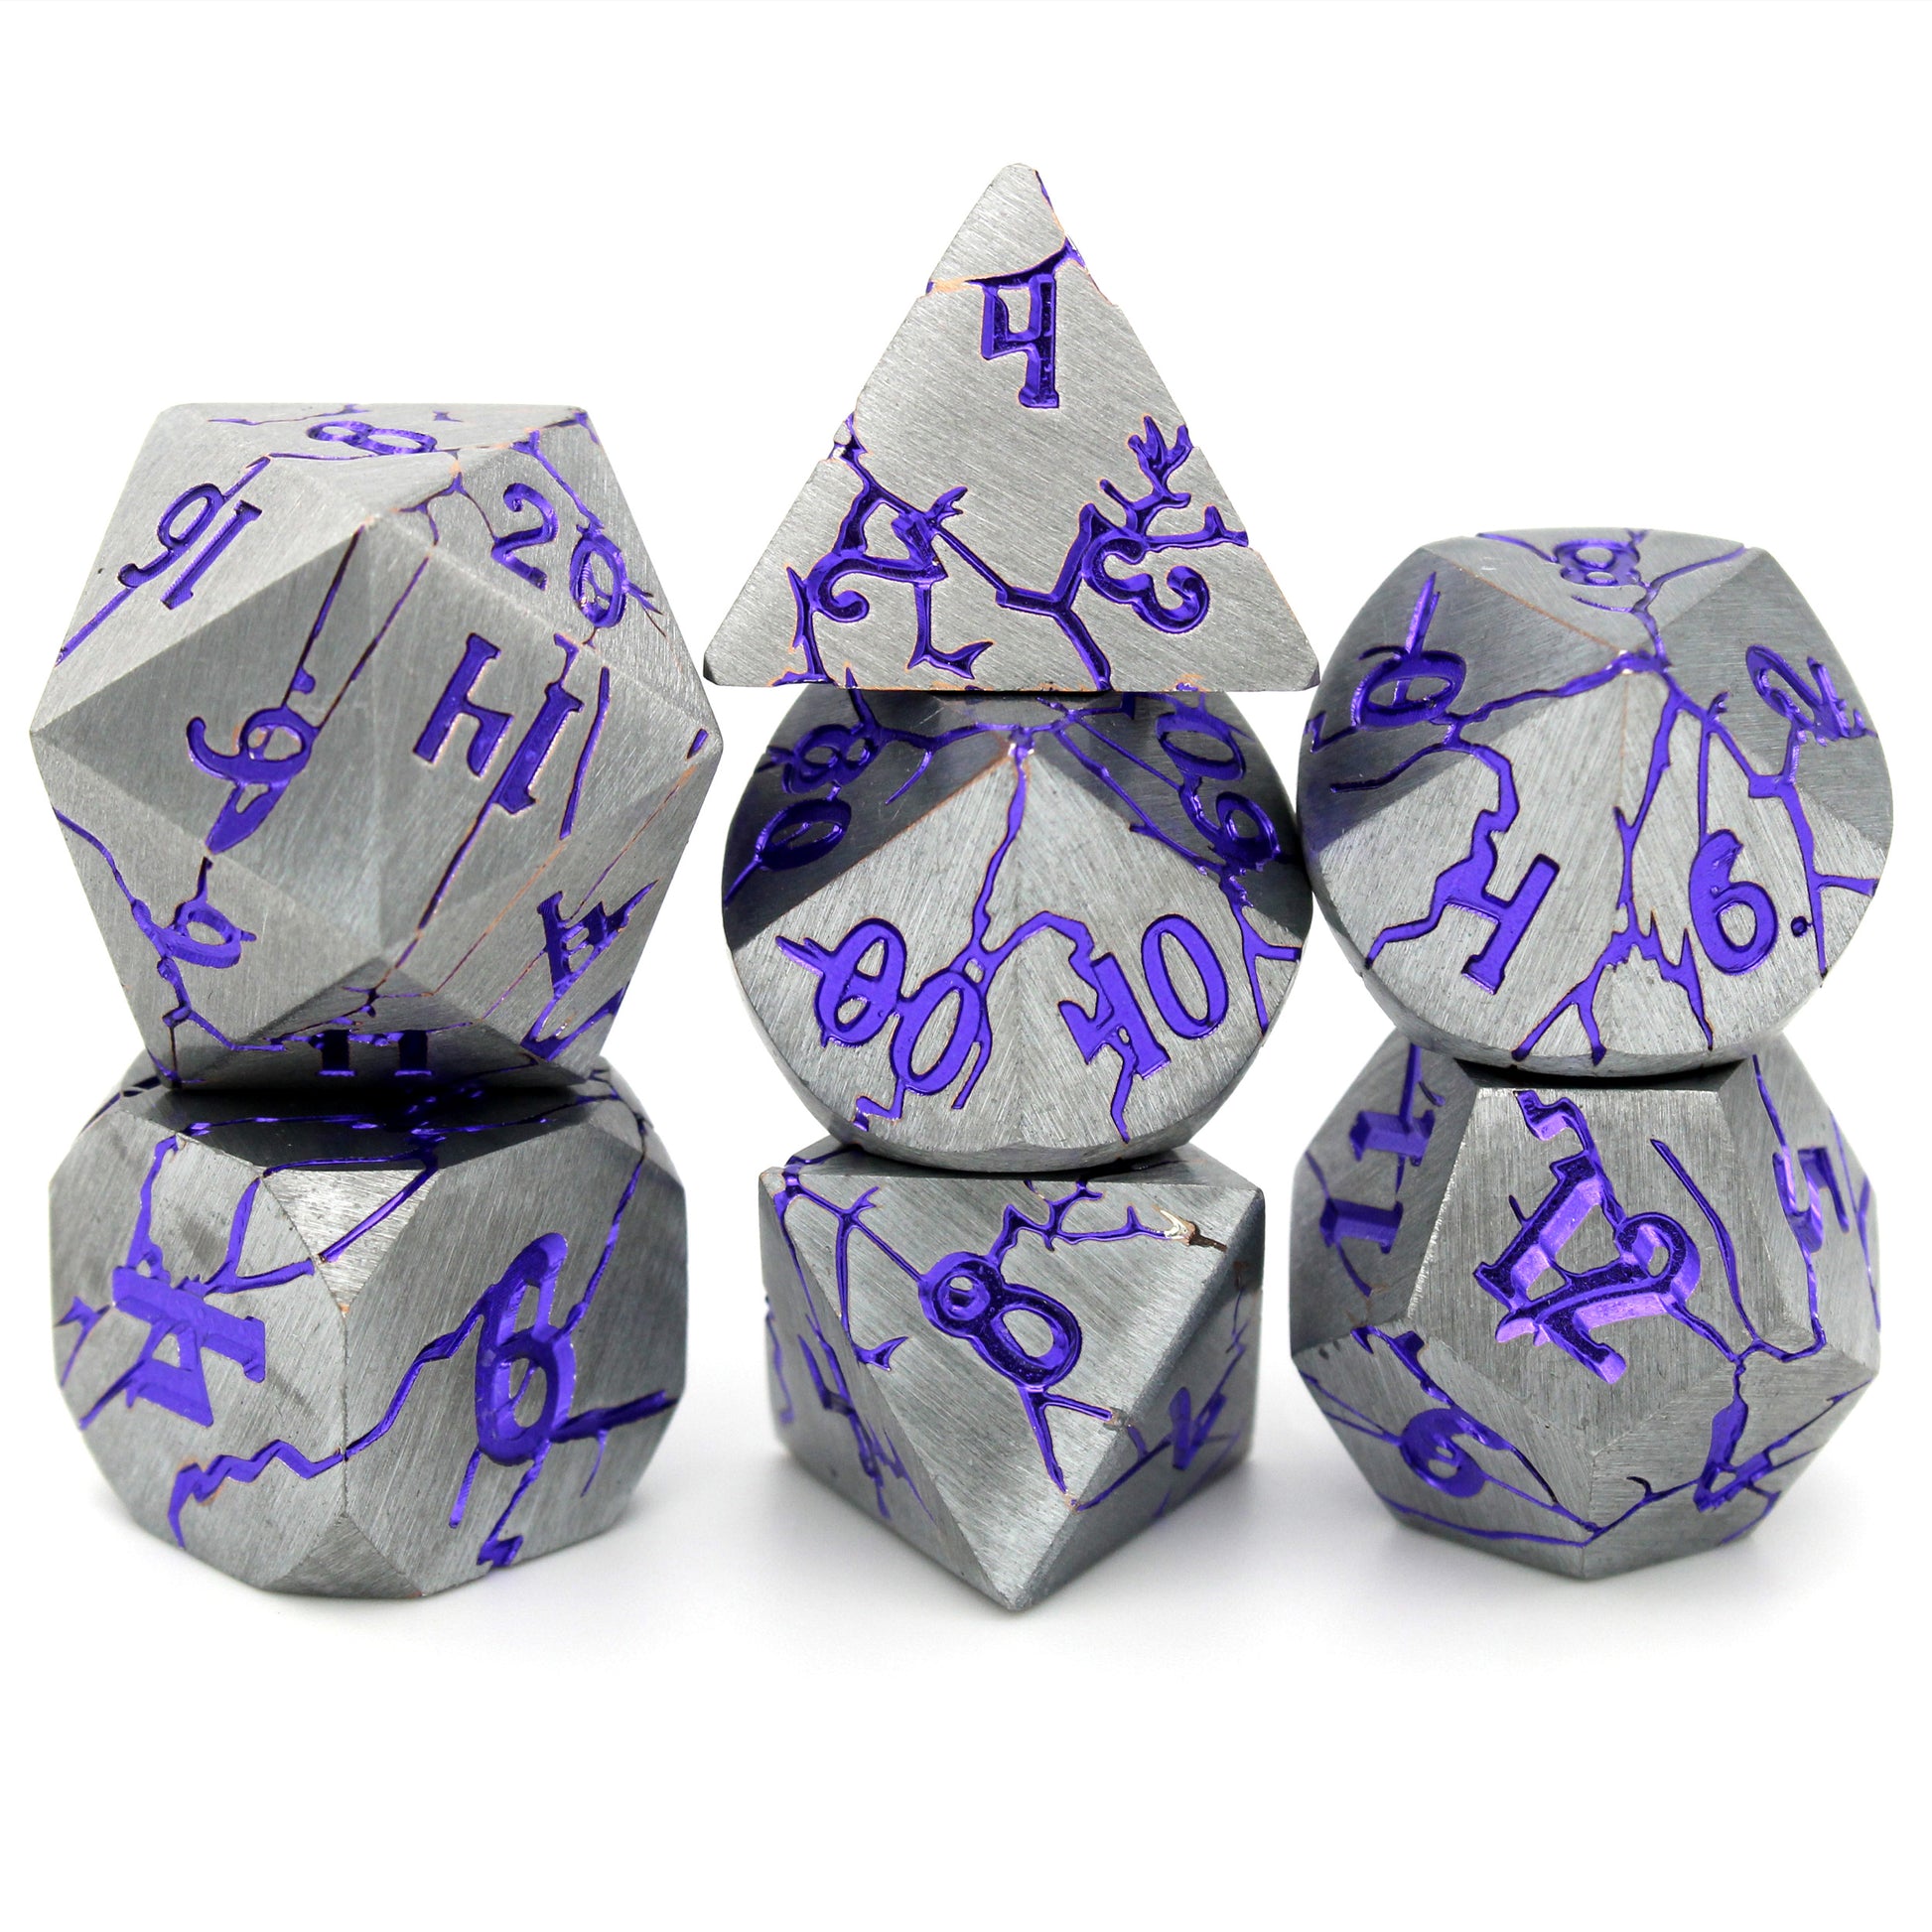 Dis Delights is a 7-piece set of silver dice, with lines and numbers of gleaming metallic purple.